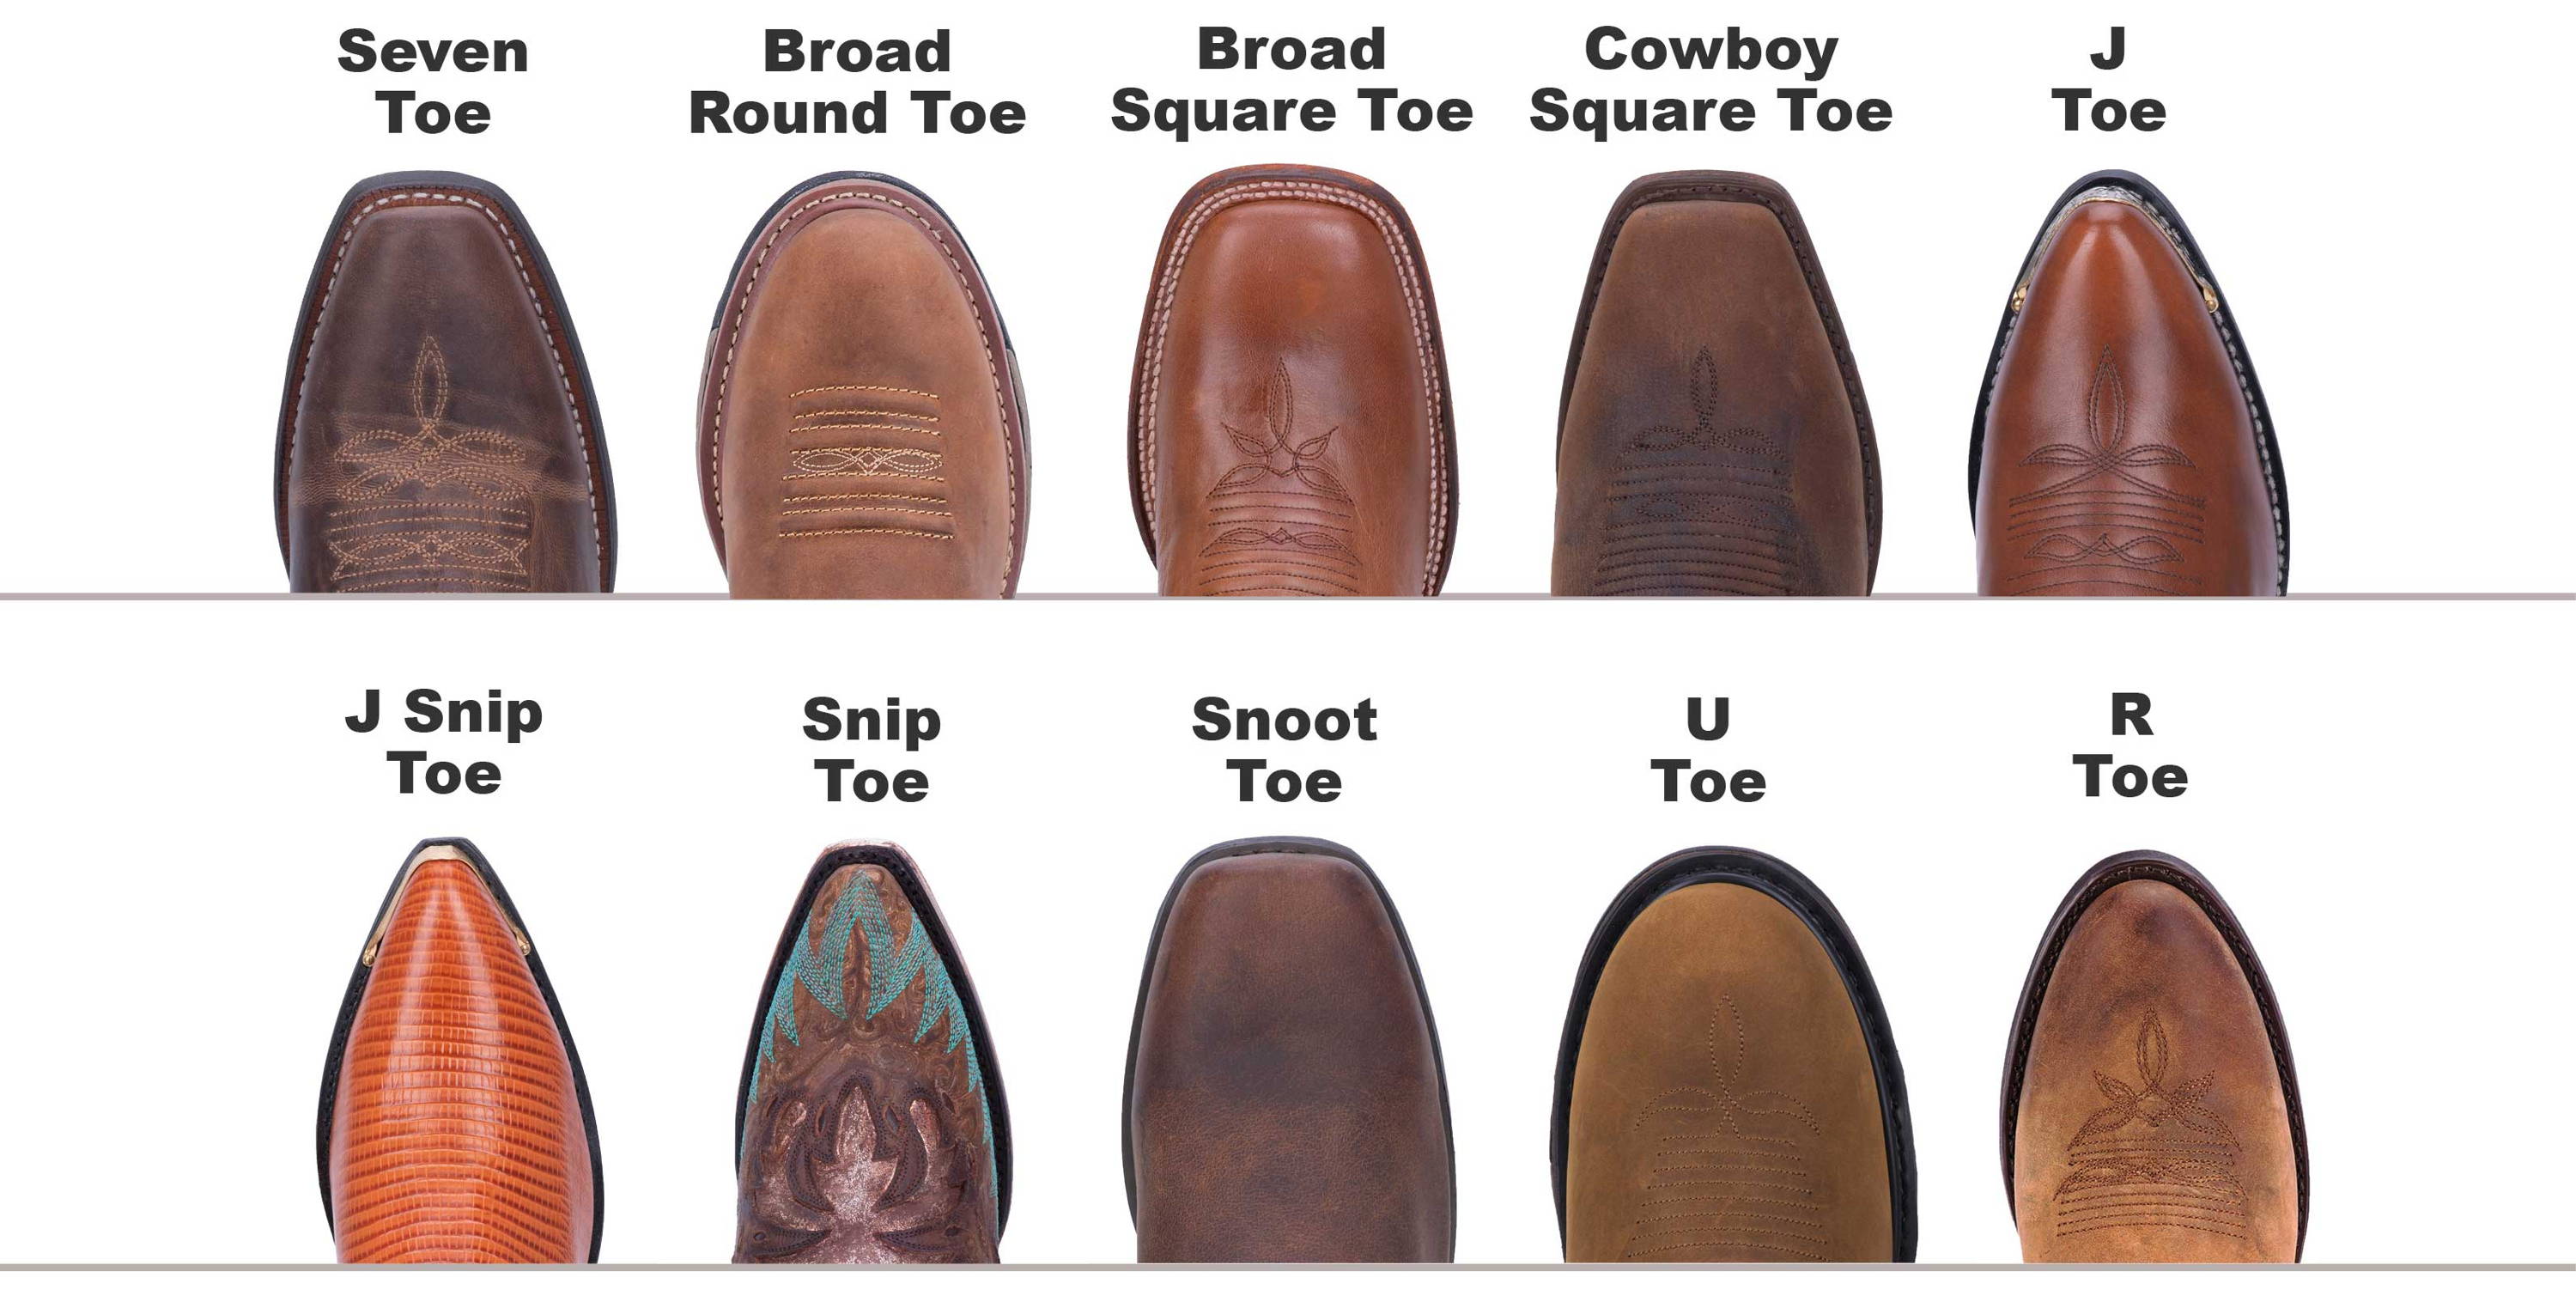 Western Cowboy Boot Toe Styles | vlr.eng.br